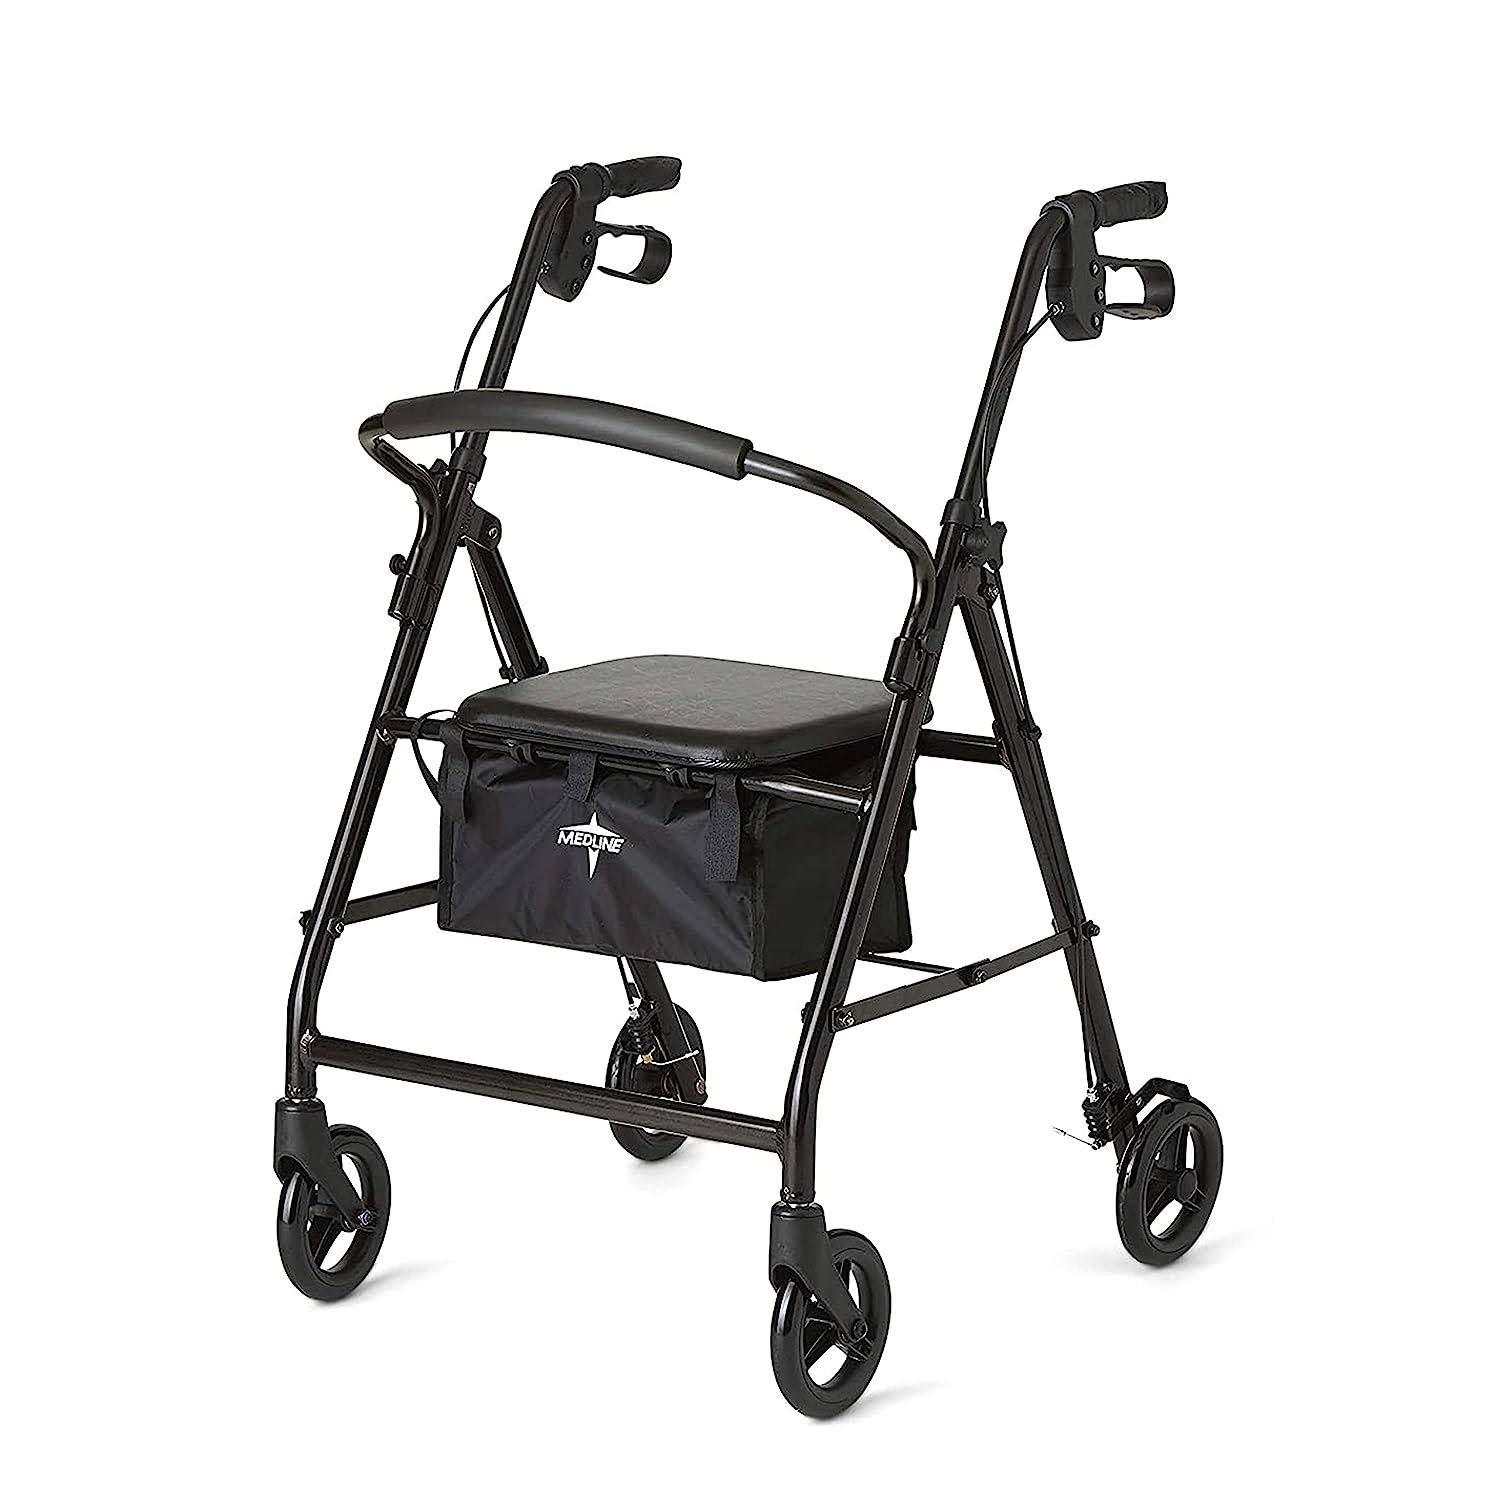 Medline Foldable Steel Rollator Walker with Seat & 6” Wheels – Stand Up, Rolling, For Injuries, Seniors, & Adults, Black